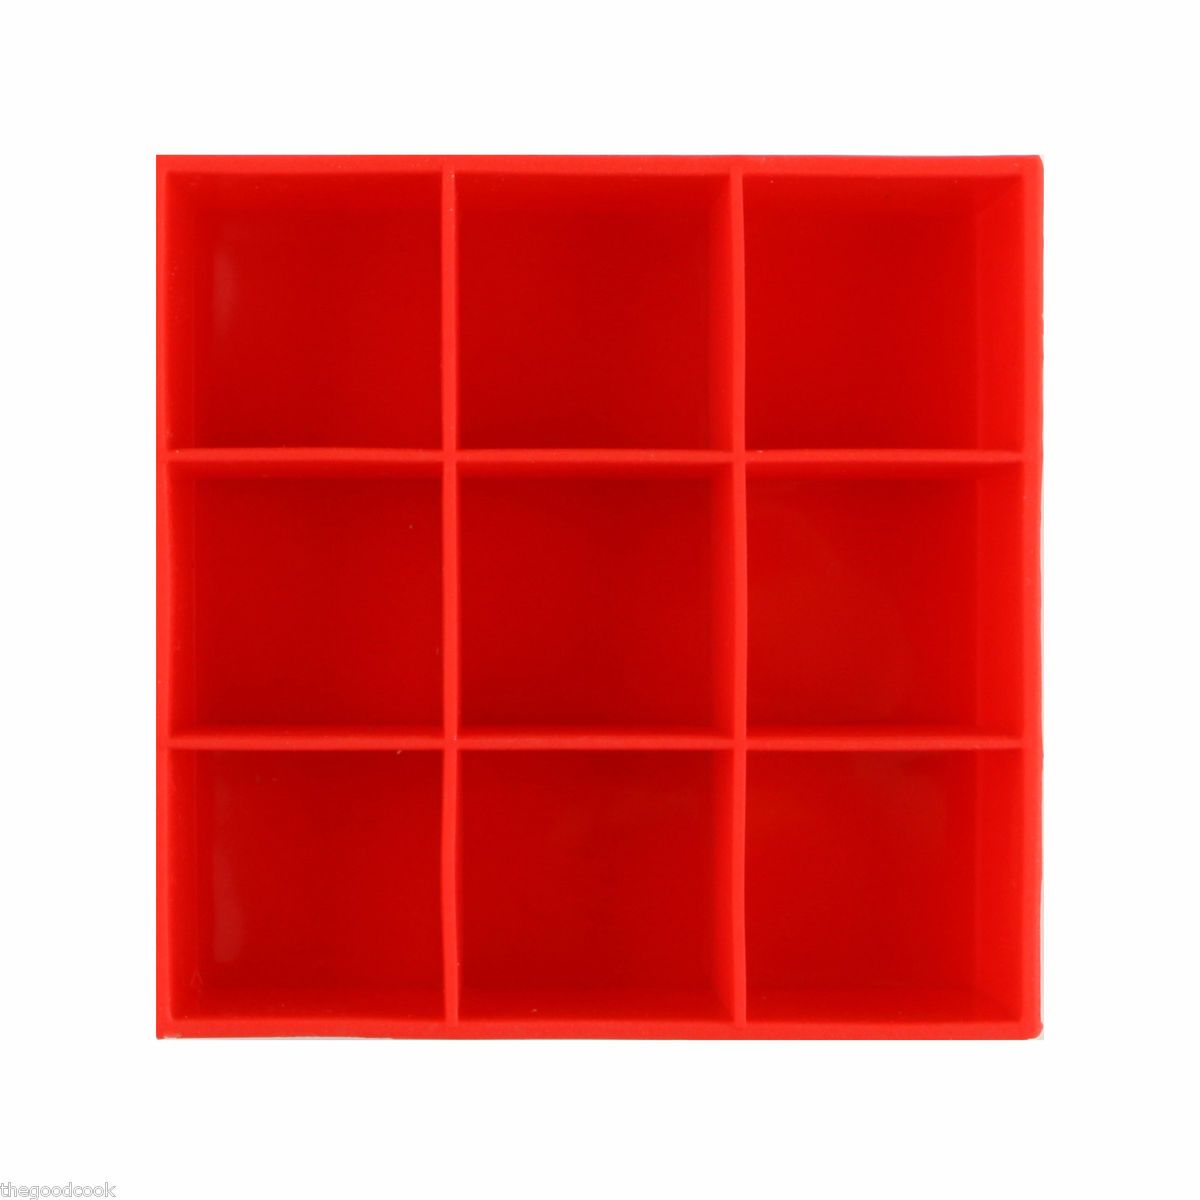 Dexas King Sized Cube Square Silicone Ice Cube Food Safe Icecube Tray